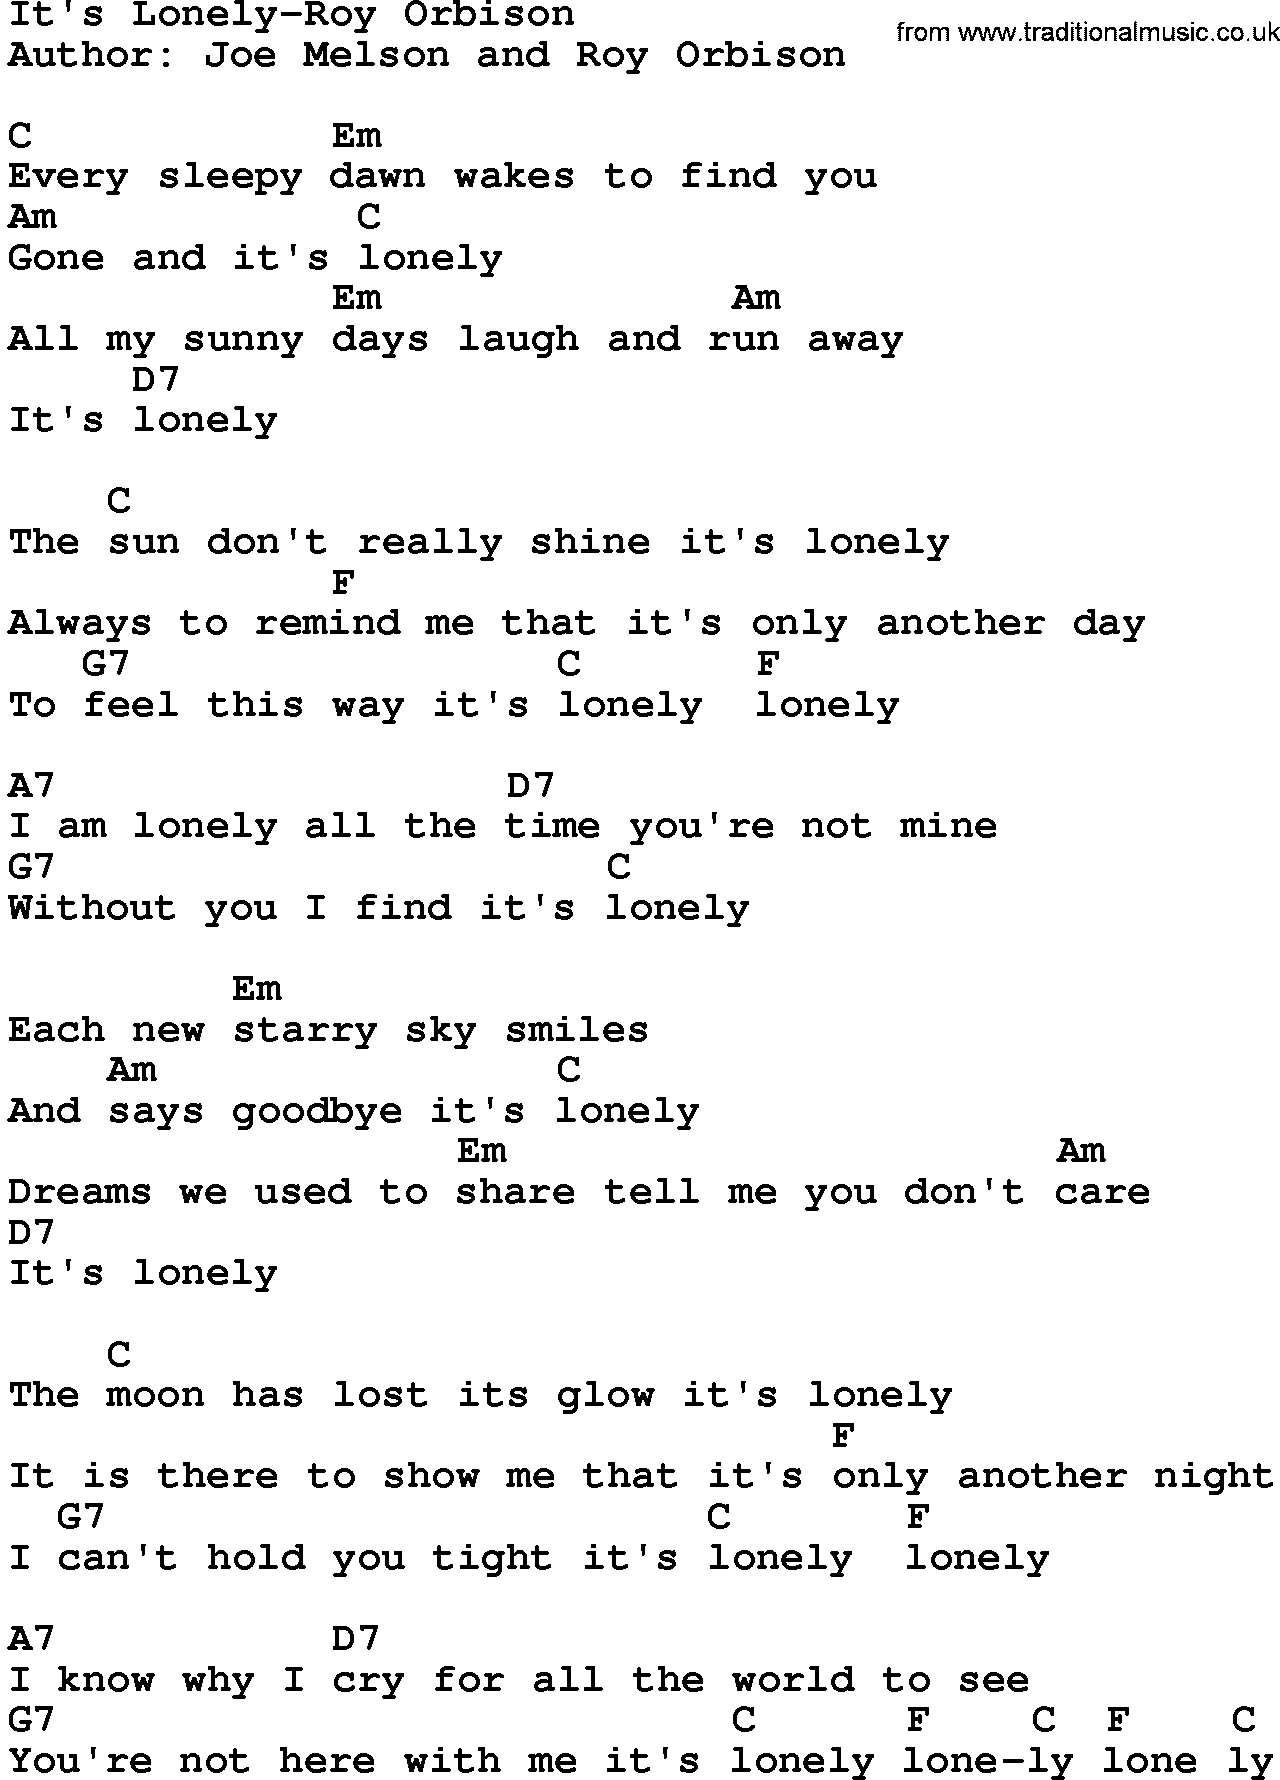 Country music song: It's Lonely-Roy Orbison lyrics and chords